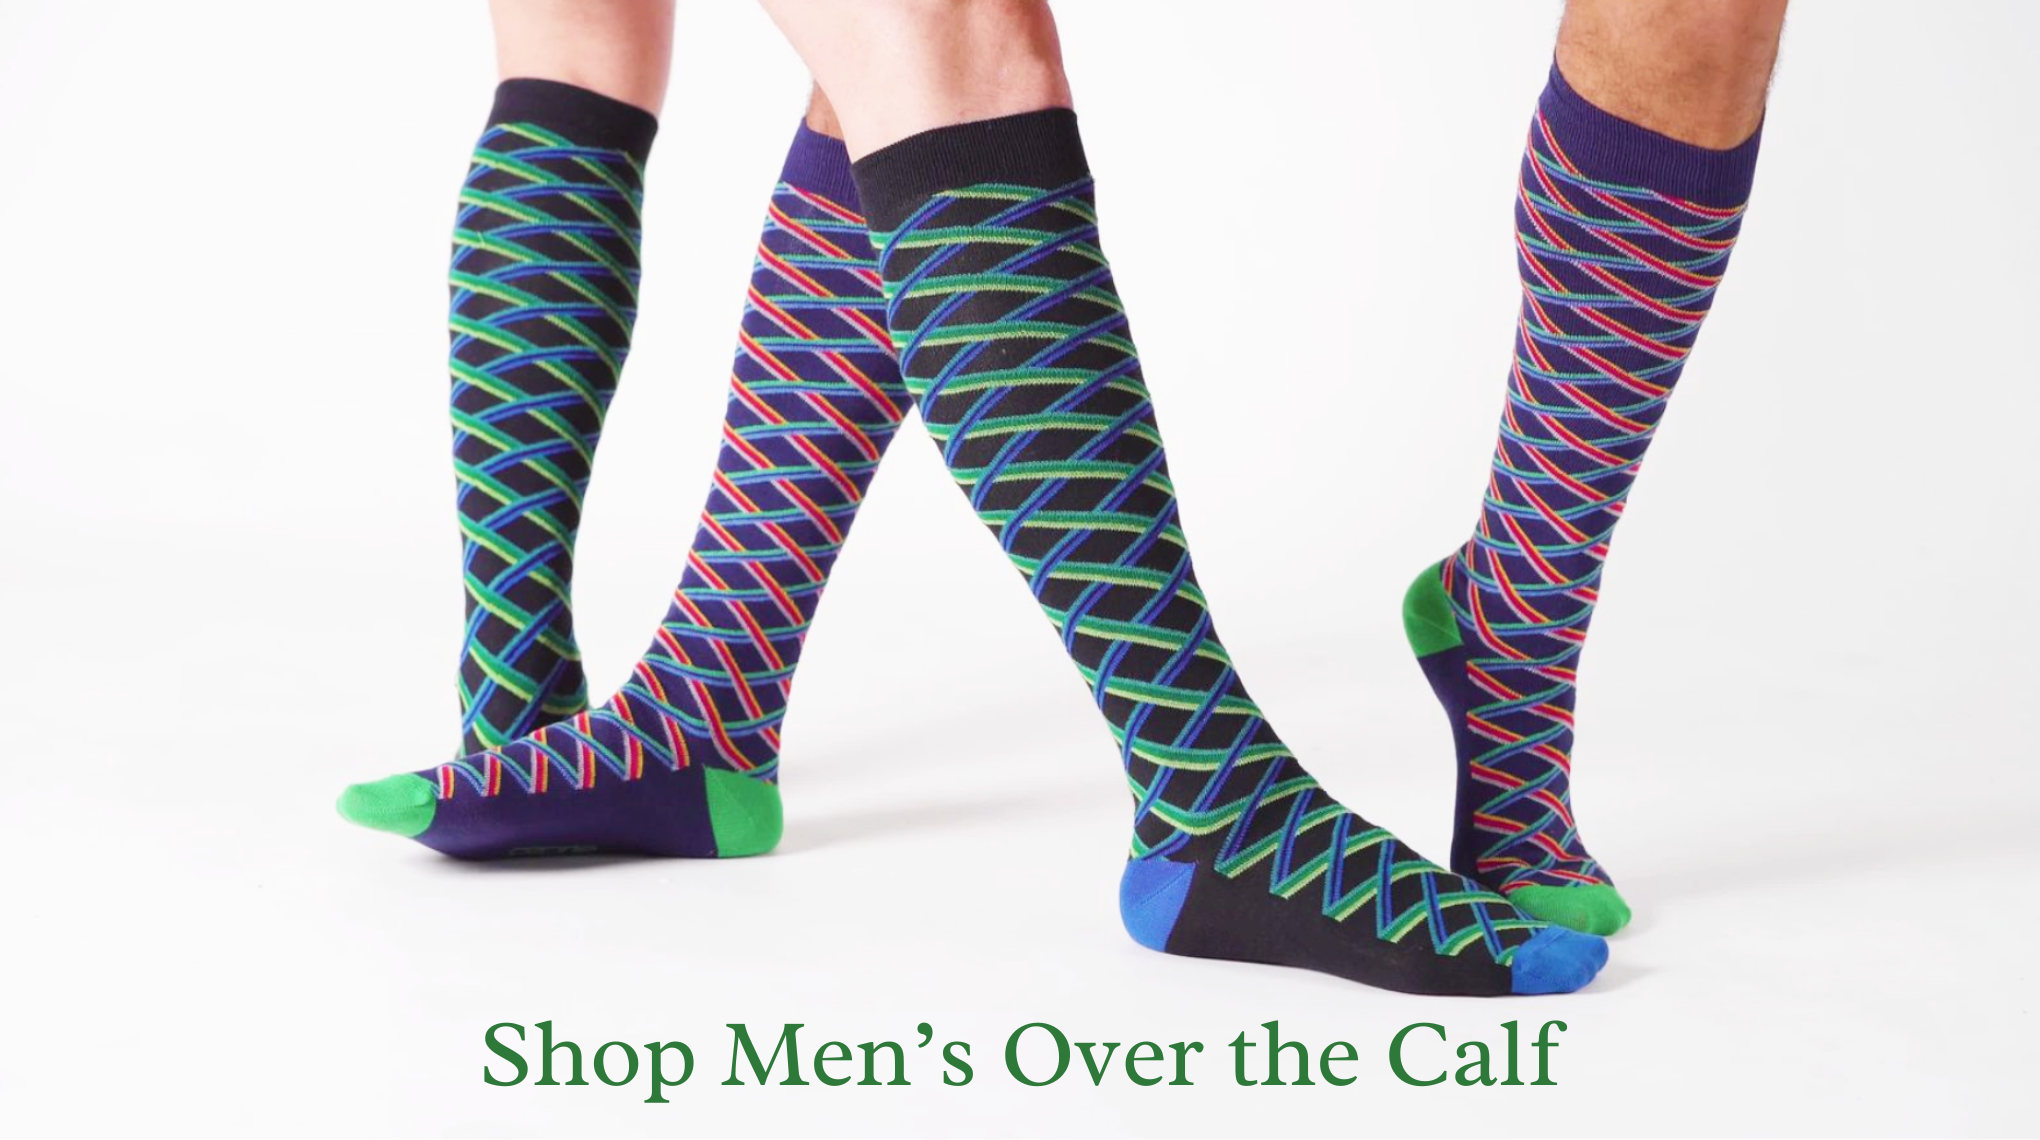 Navy No Show Socks for Women, Stripe and Patchwork Design